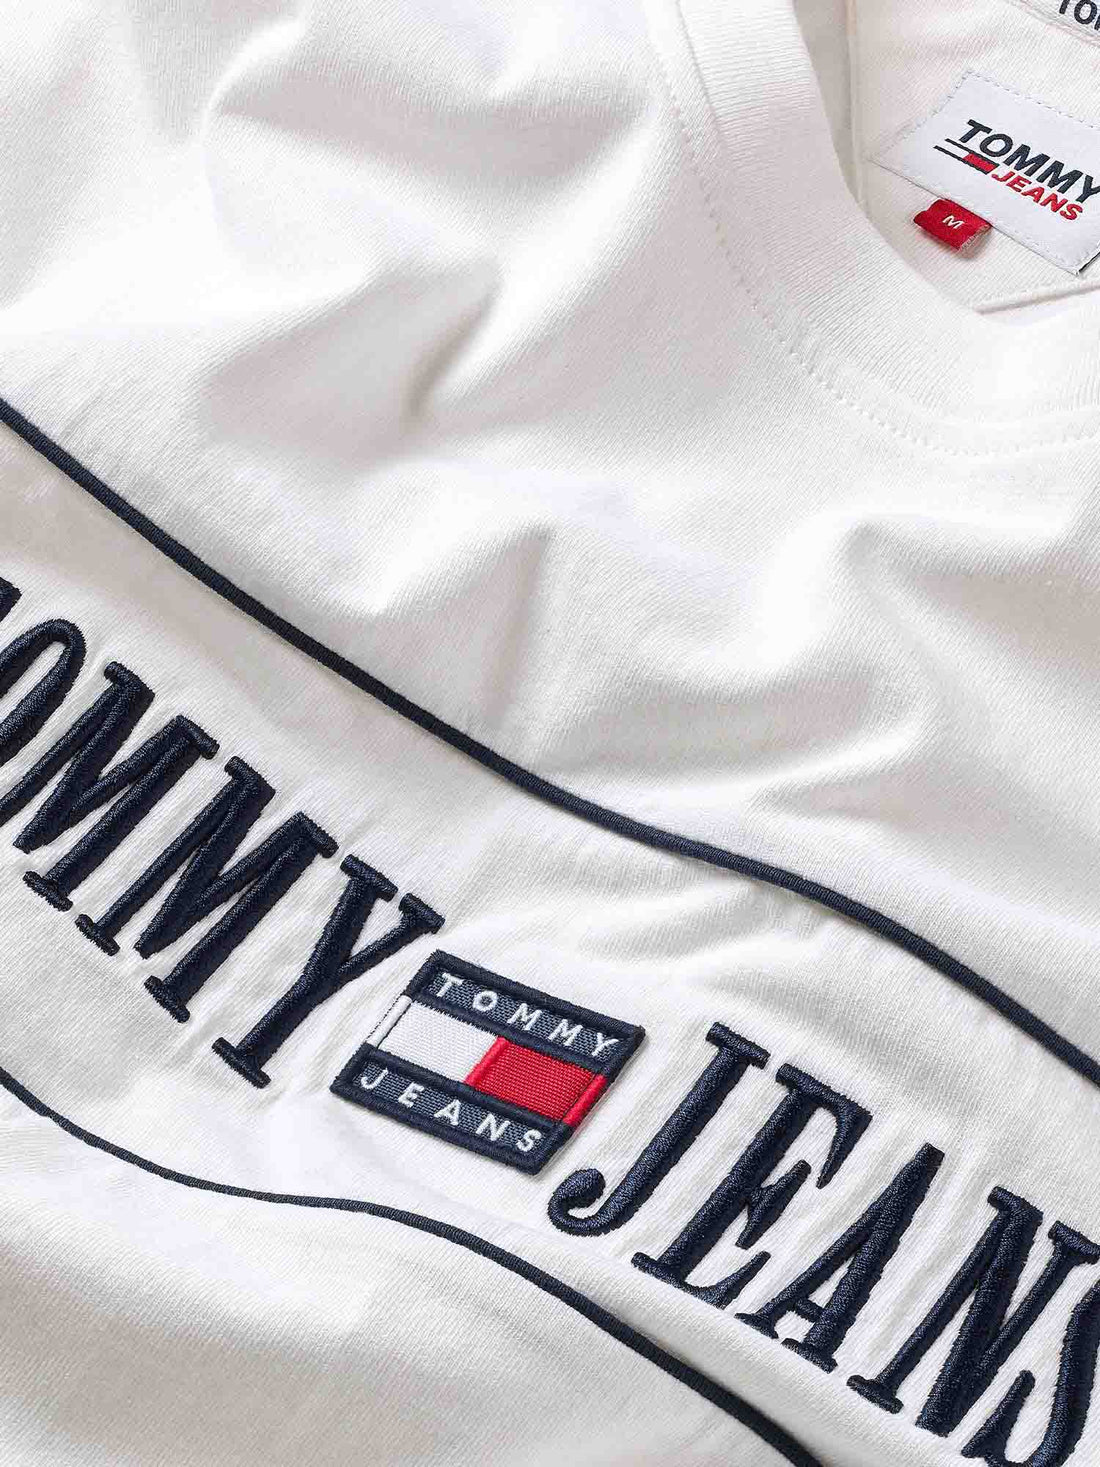 T-shirt Bianco Tommy Jeans